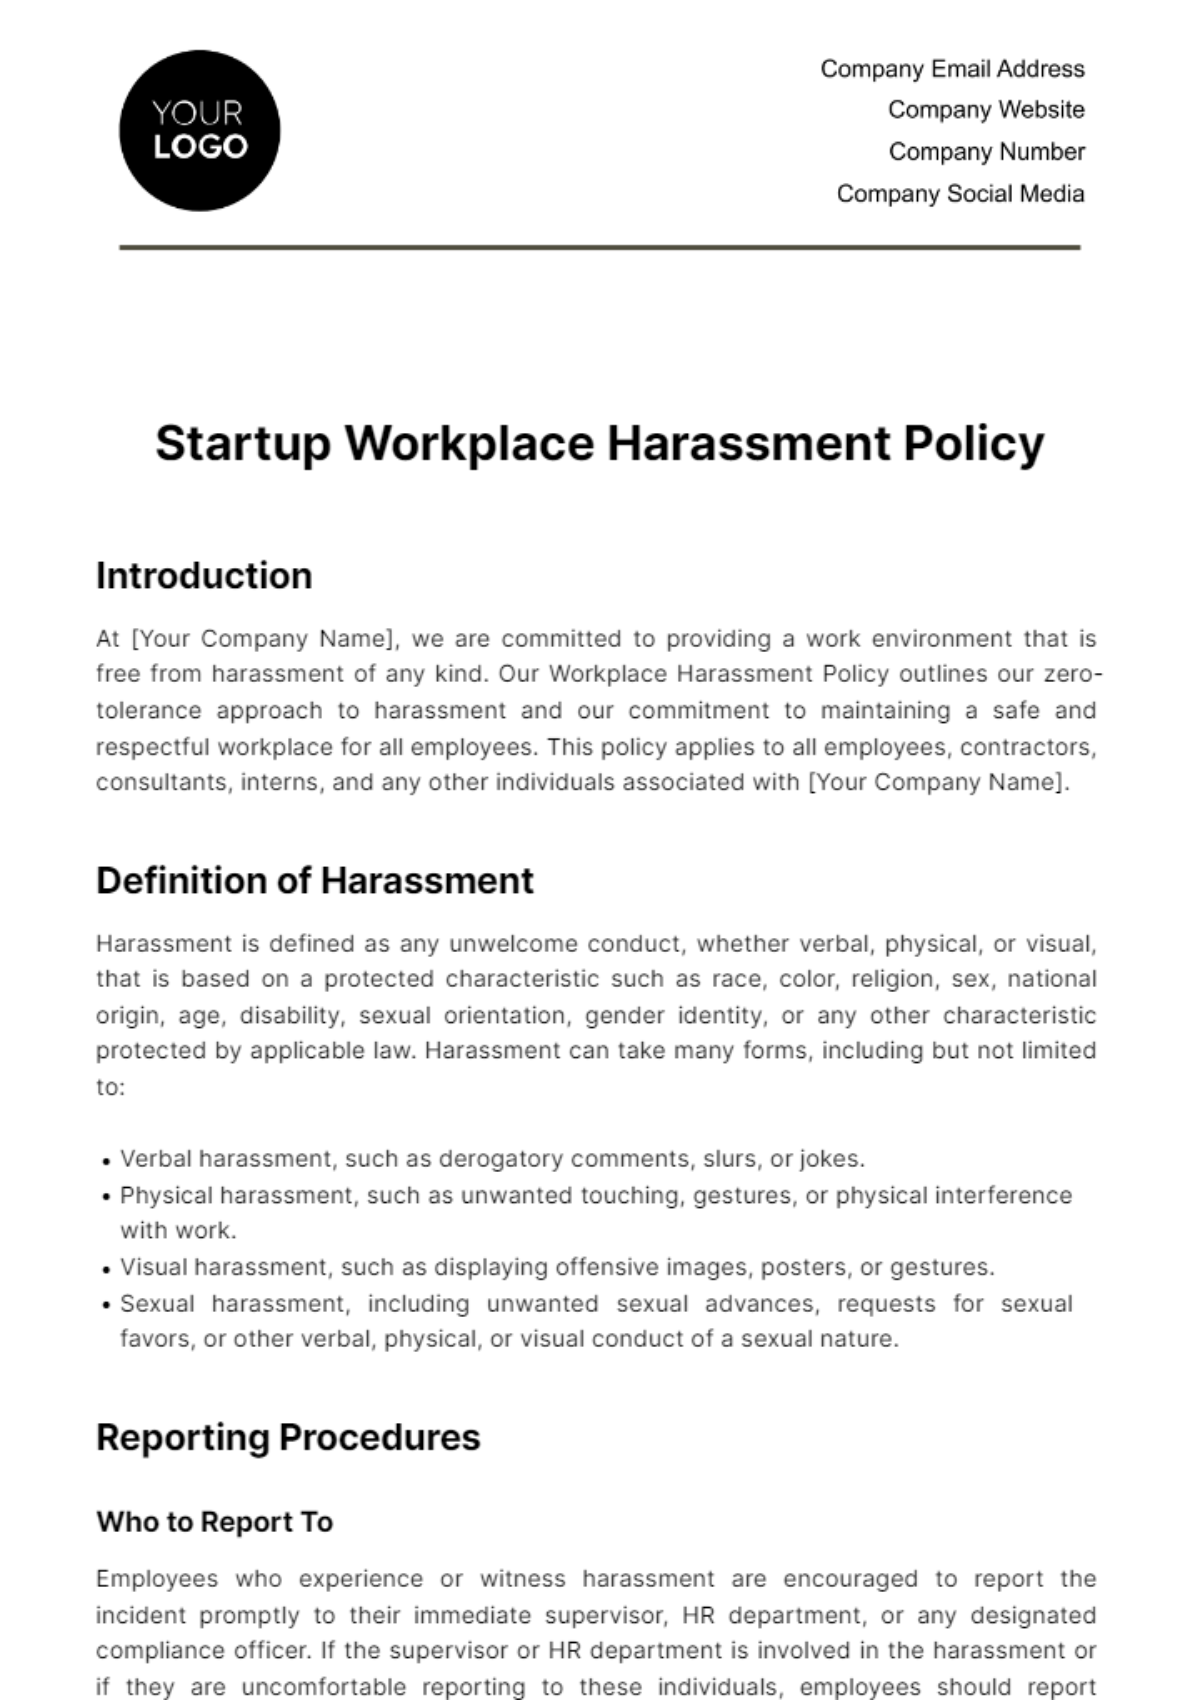 Startup Workplace Harassment Policy Template